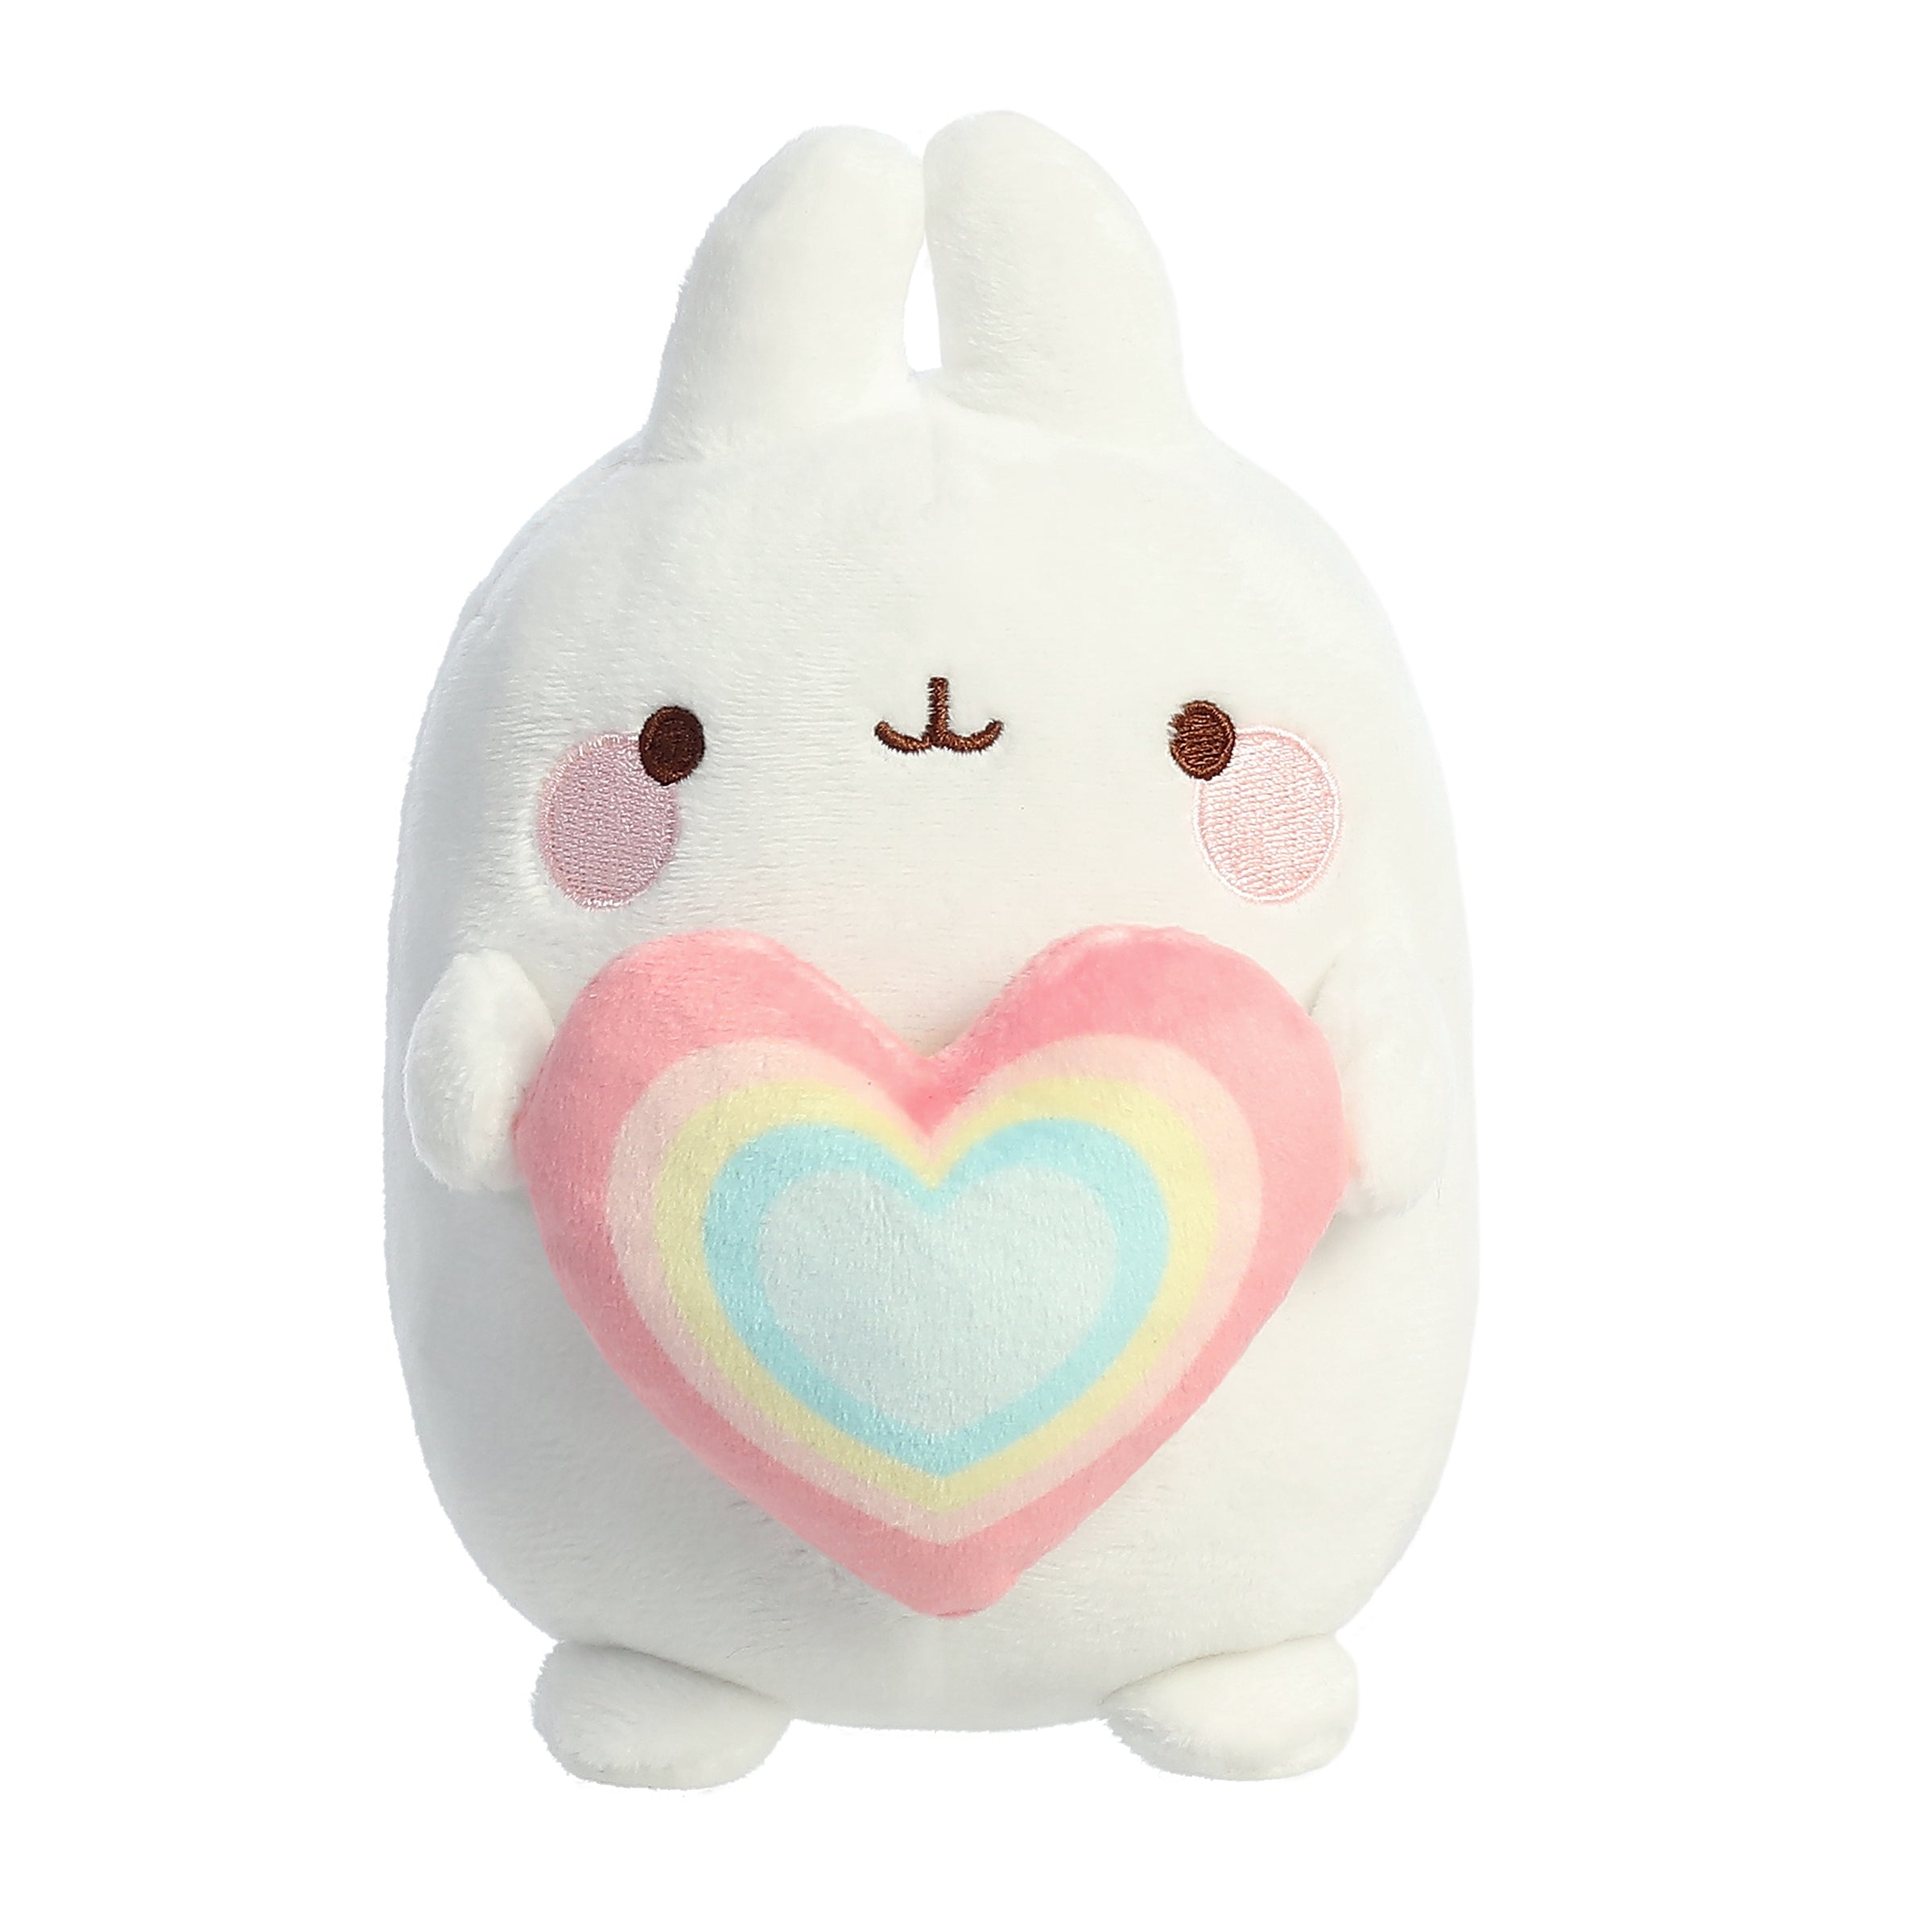 Rainbow Heart Molang plush that looks like a chubby bunny, with a soft texture, blushing cheeks, and a rainbow heart